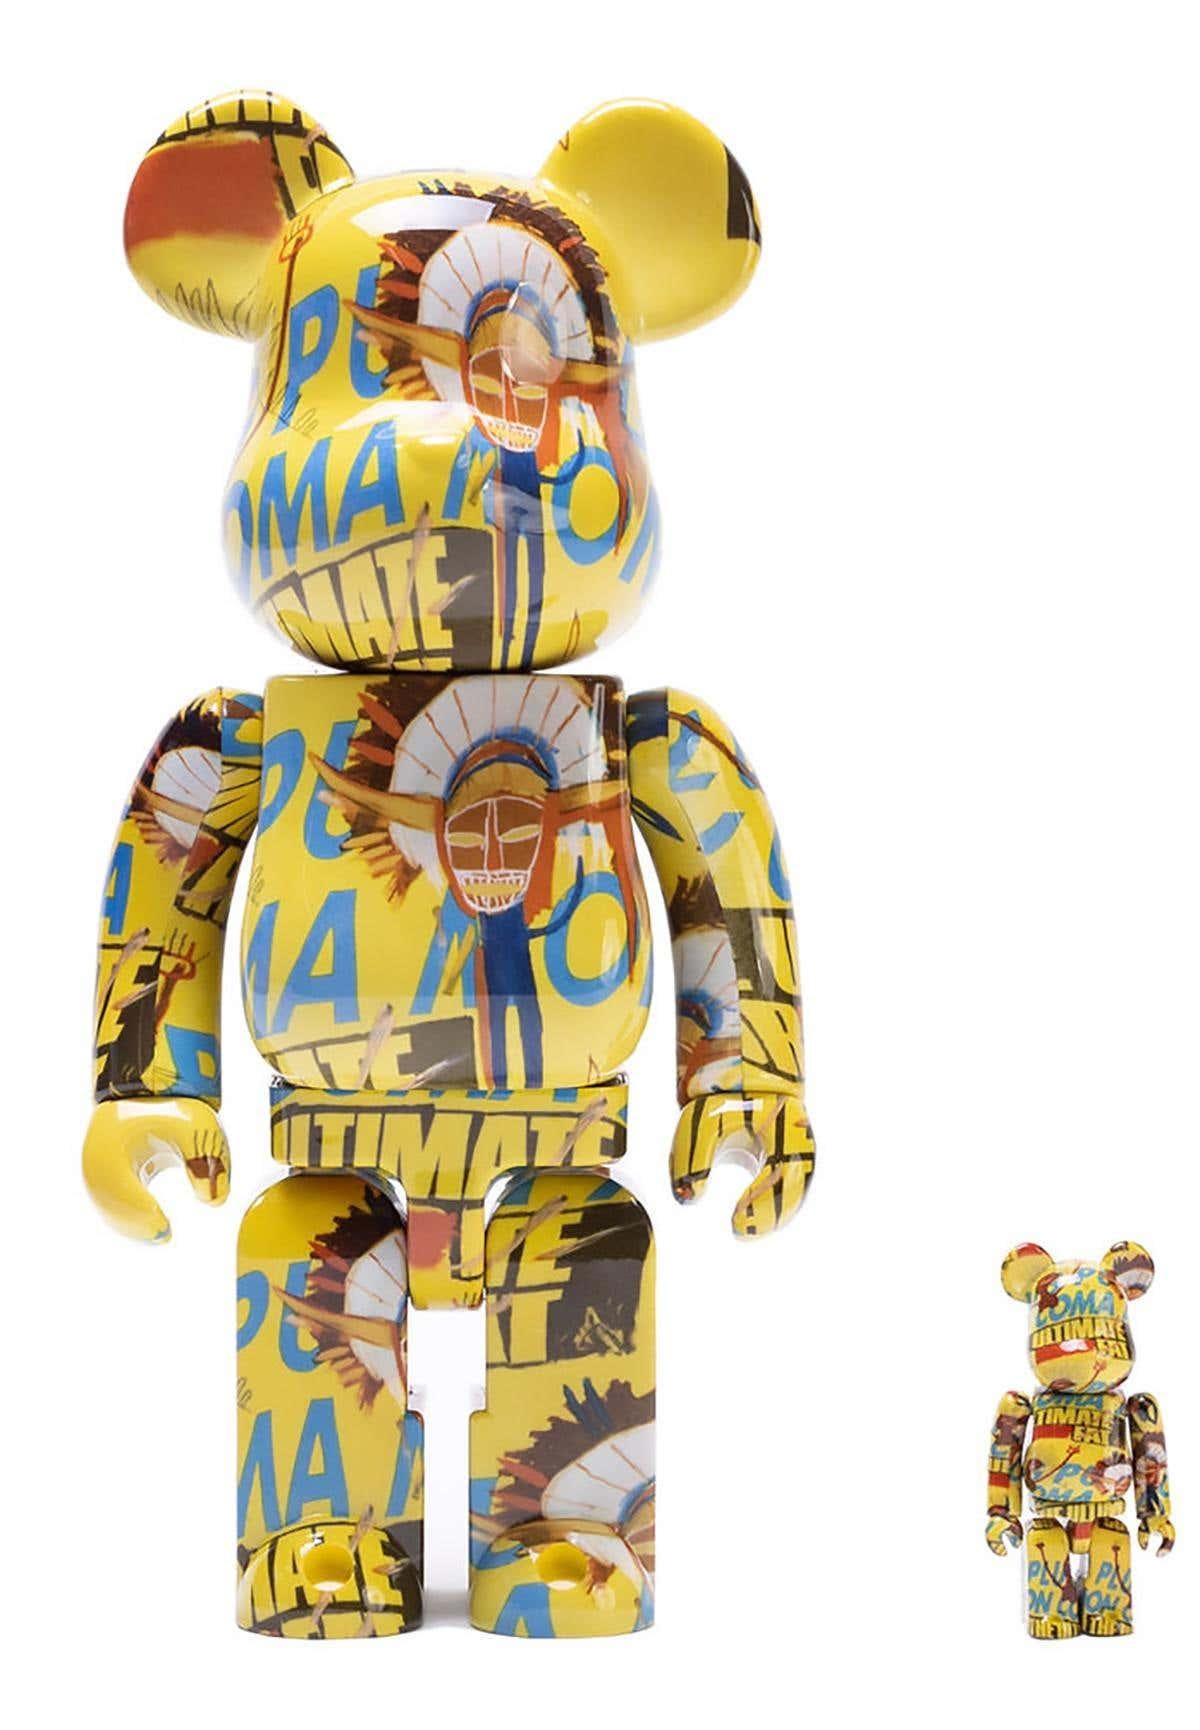 Keith Haring, Andy Warhol, Basquiat Bearbrick 400%: set of 3 works (c. 2019-2021):
Unique, timeless Keith Haring, Andy Warhol, and Jean-Michel Basquiat collectibles, each trademarked & licensed by the artist's respective estate(s). The partnered